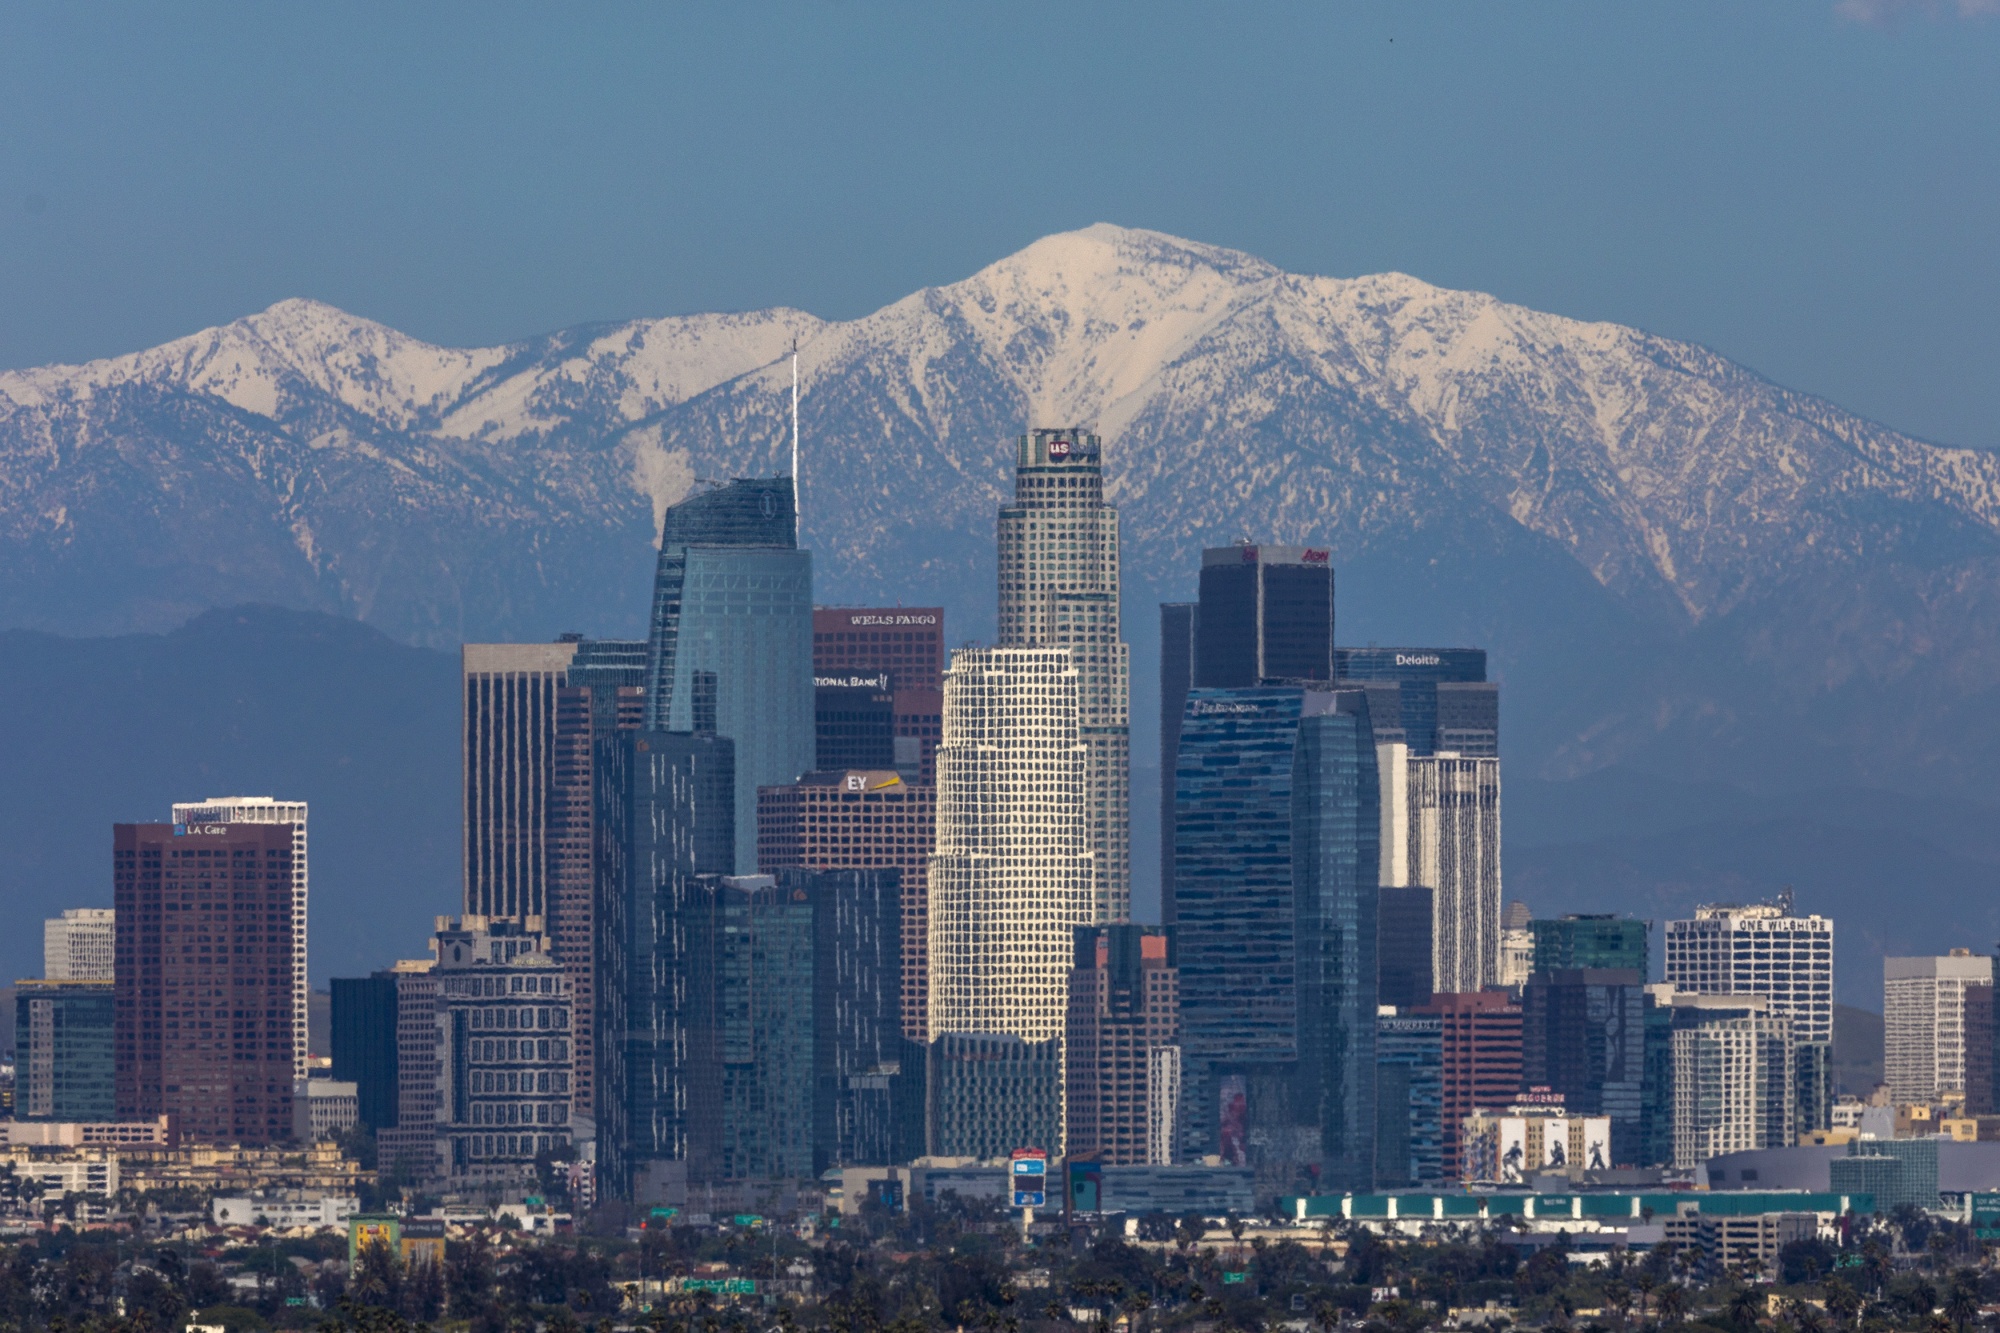 A rare sight emerged for L.A. residents in April 2020: the snow-capped peaks of the San Gabriel mountains, clearly visible in the smog-free atmosphere.&nbsp;&nbsp;